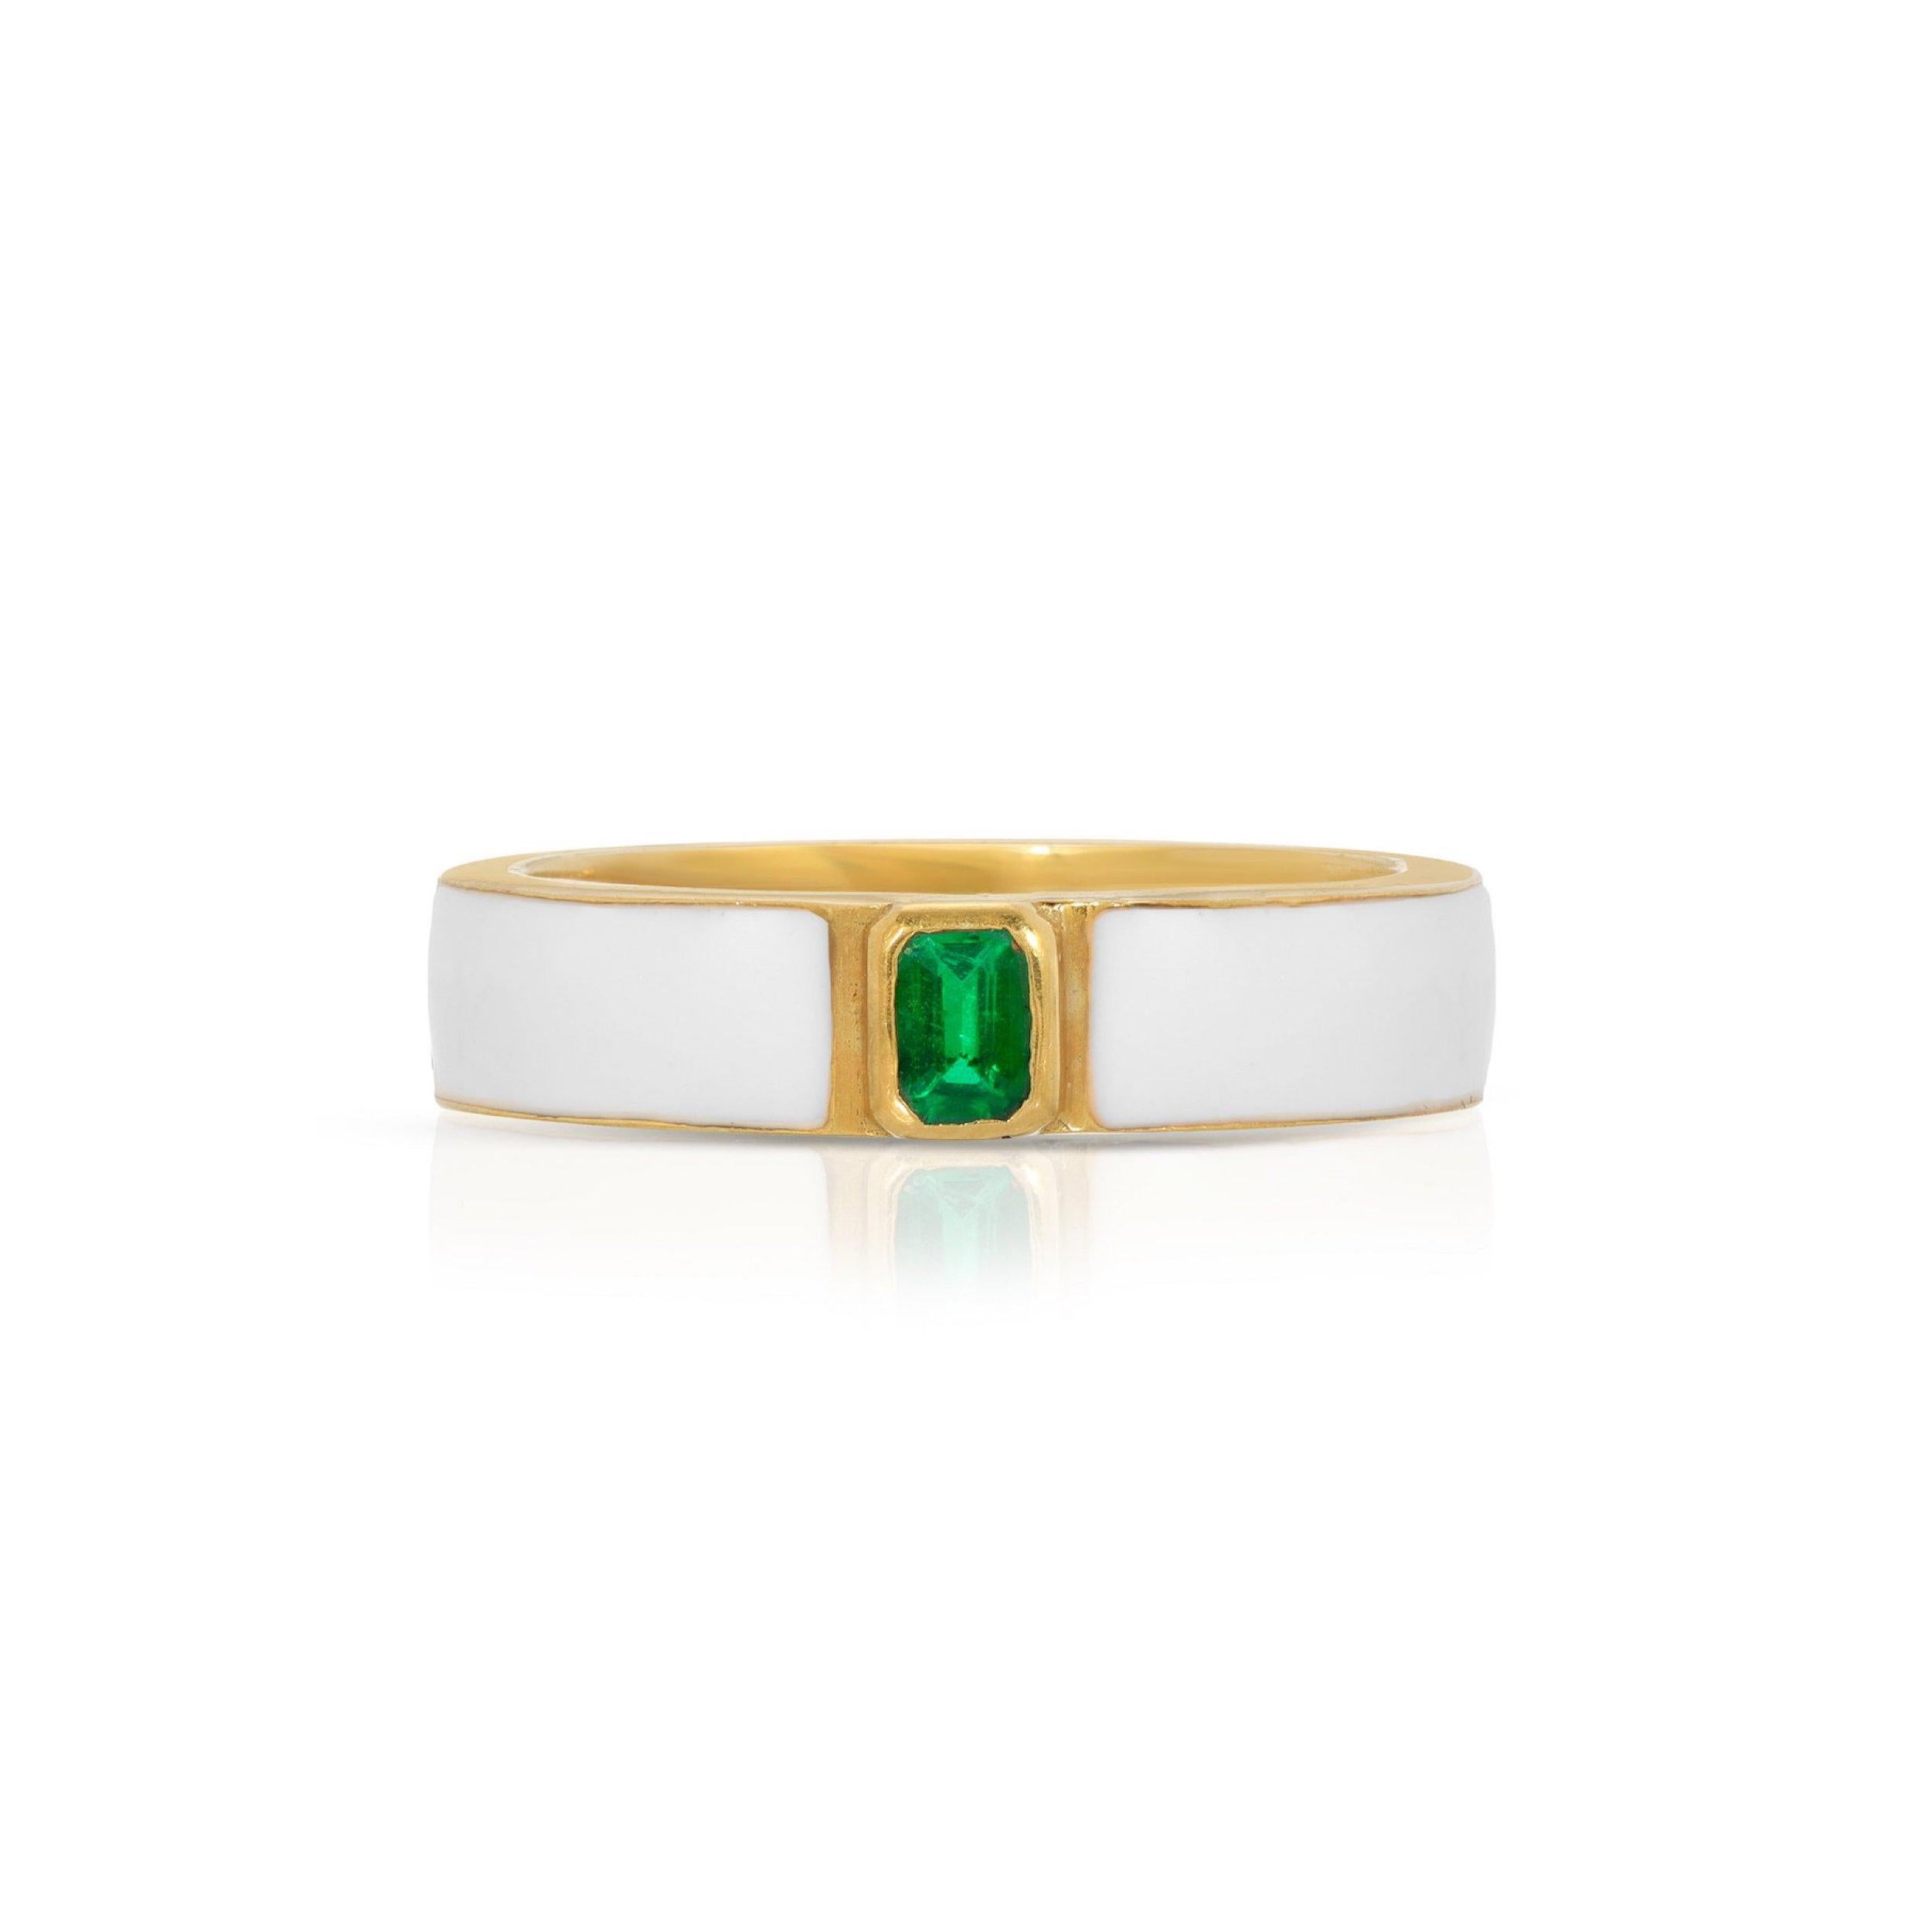 A beautiful band ring of modern design with an Emerald Cut Emerald and enamel. This ring features glossy white enamel contrasted by a fiery Emerald.  This ring has 22 Karat Gold overlay Silver accents and a 22 Karat Gold overlay Silver interior.